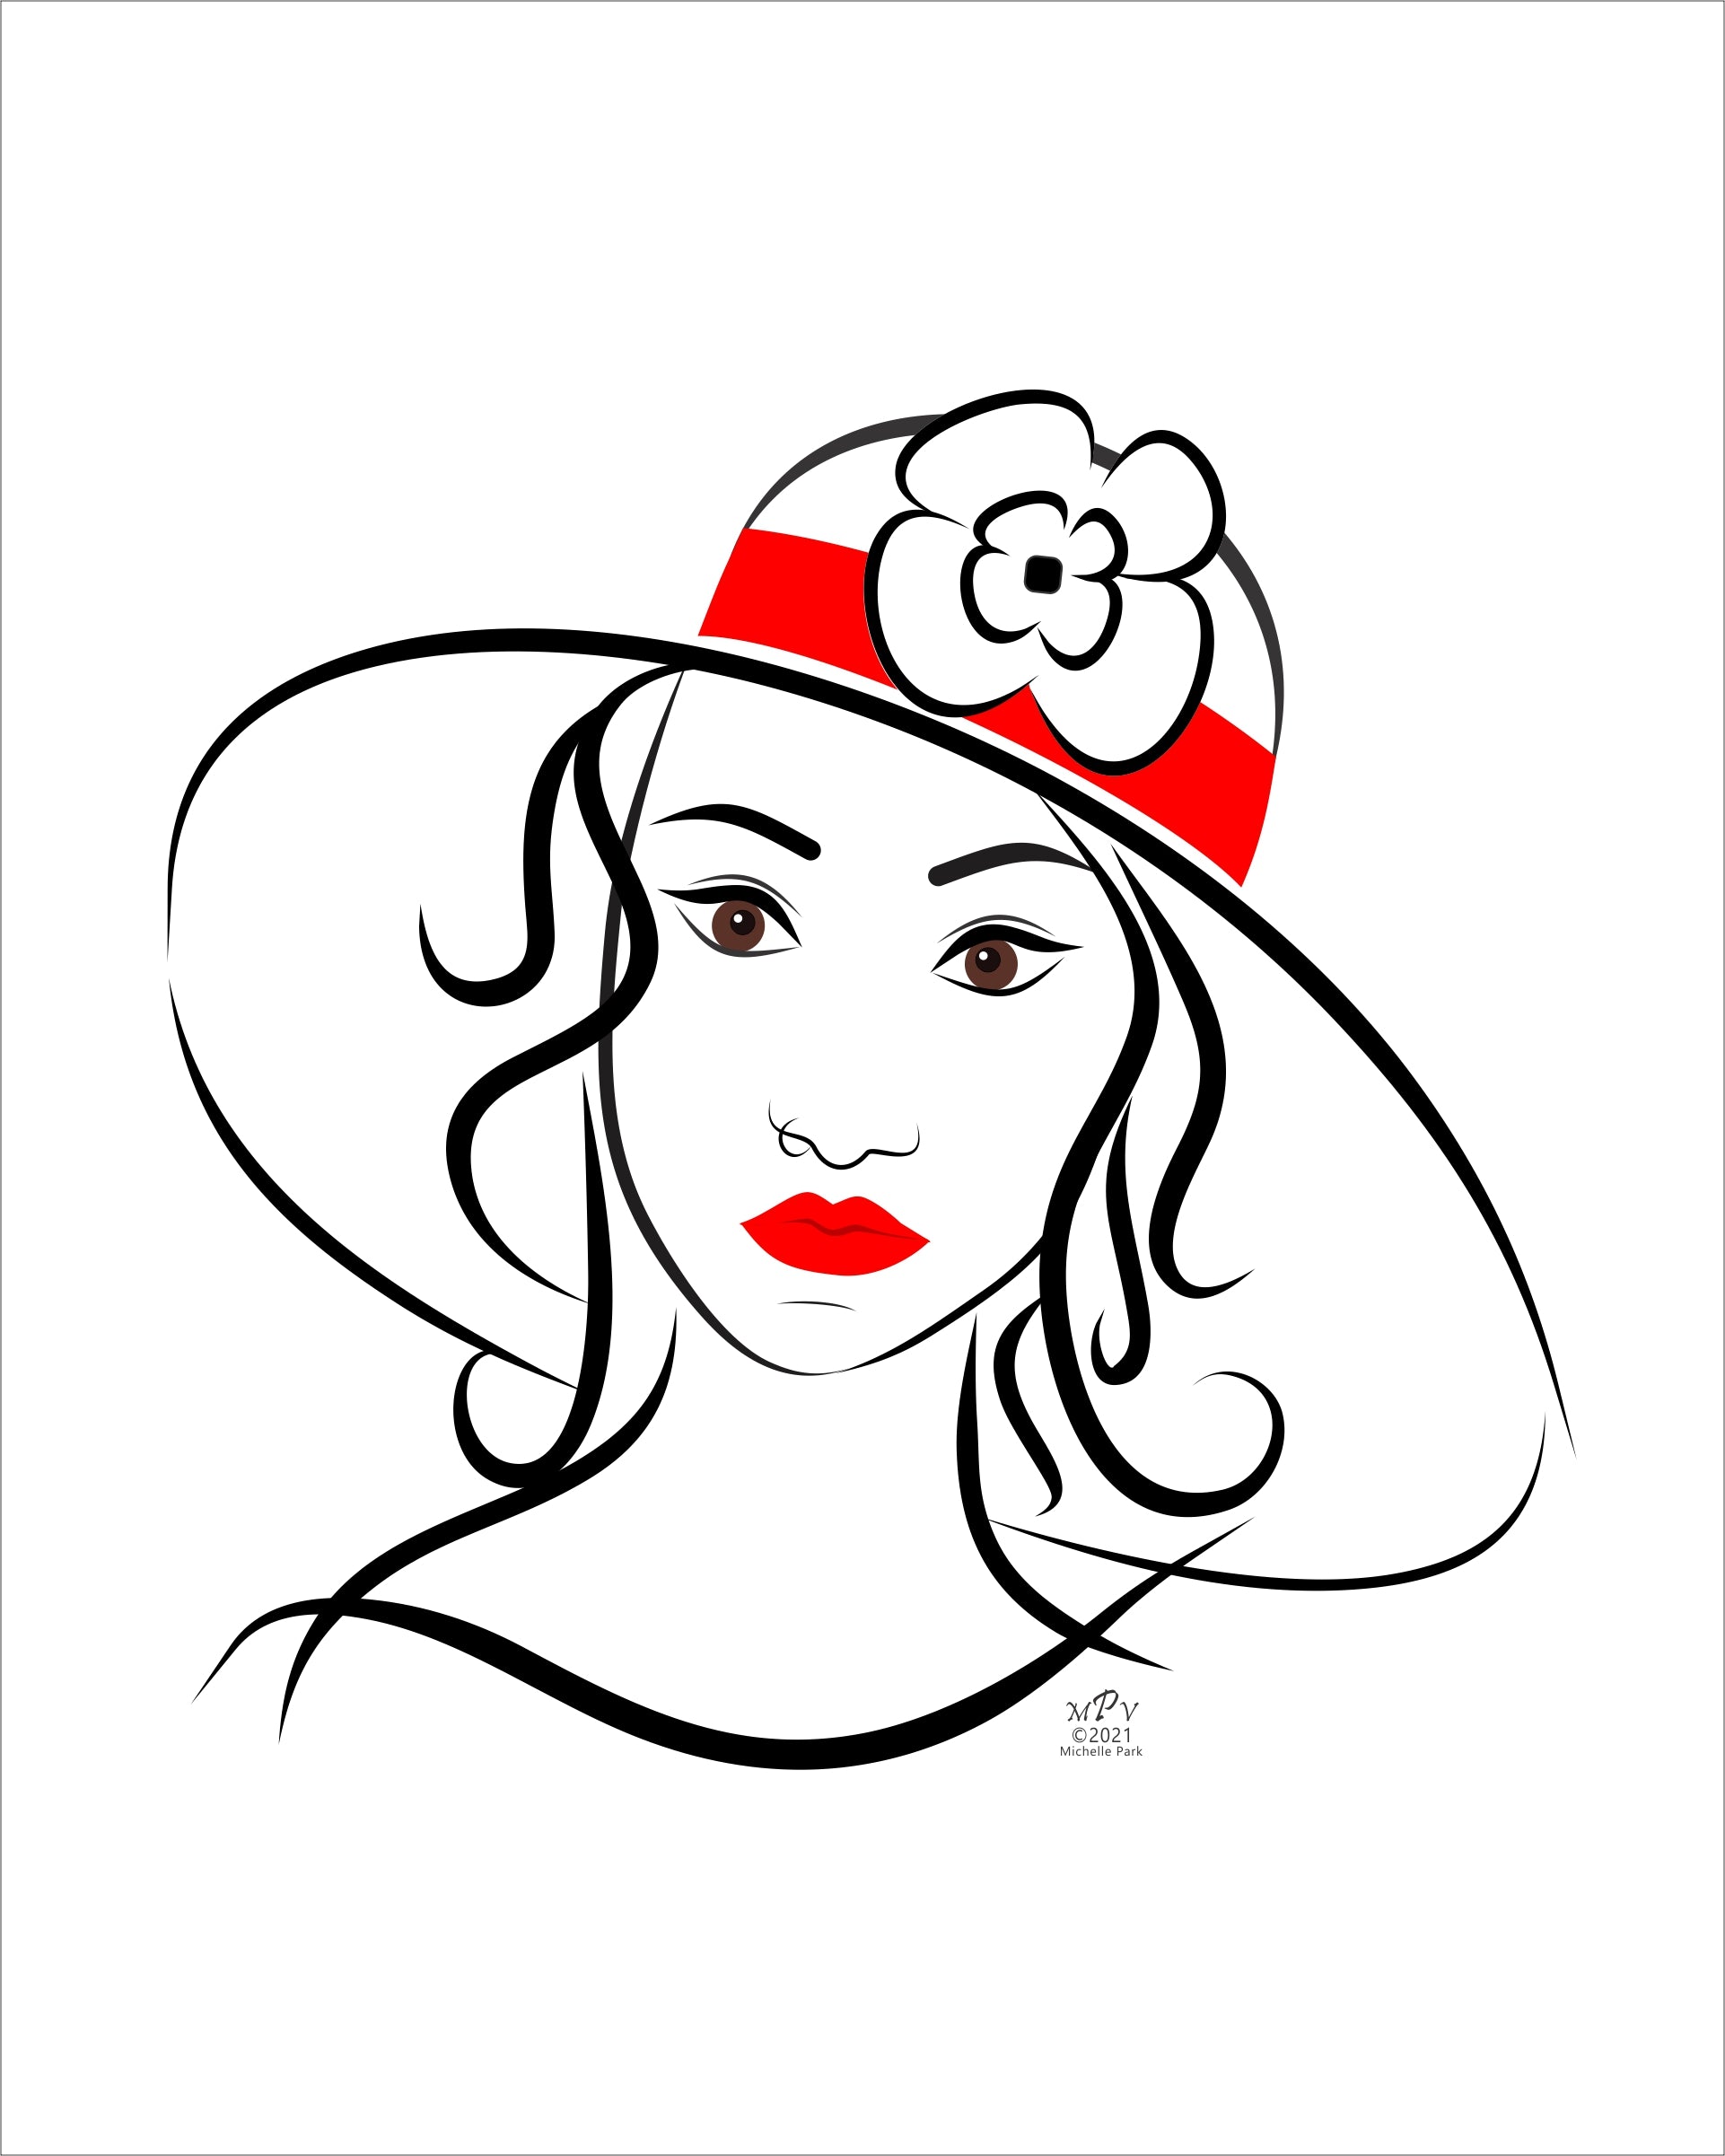 A stylized line art drawing of a girl with a sun hat. Black and white with hits of red on lips and hat band.